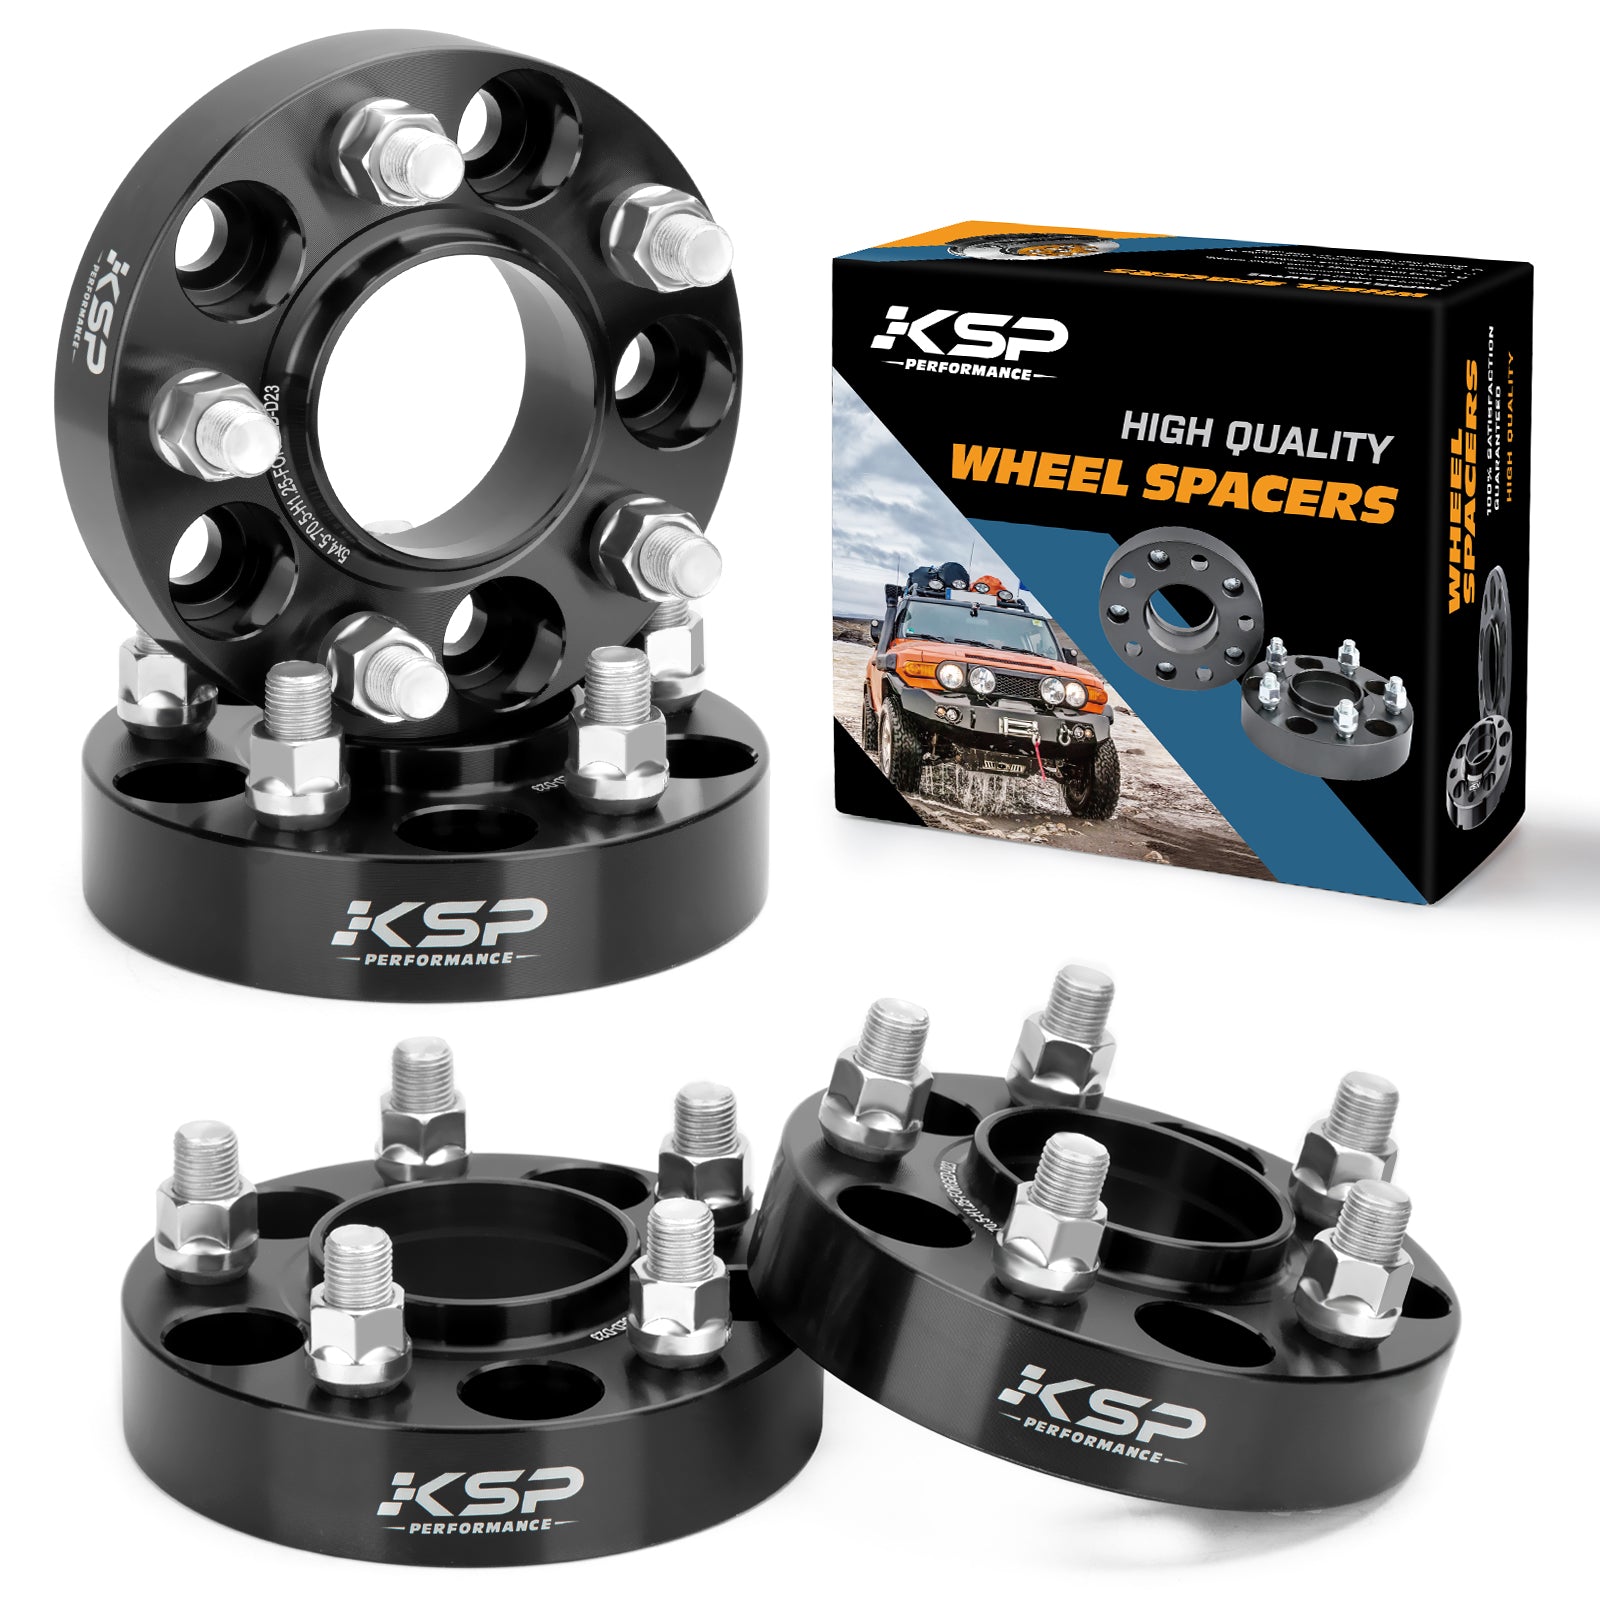 Wheel Spacers 1.25" Hubcentric For 2015-2020 Ford Mustang xccscss.